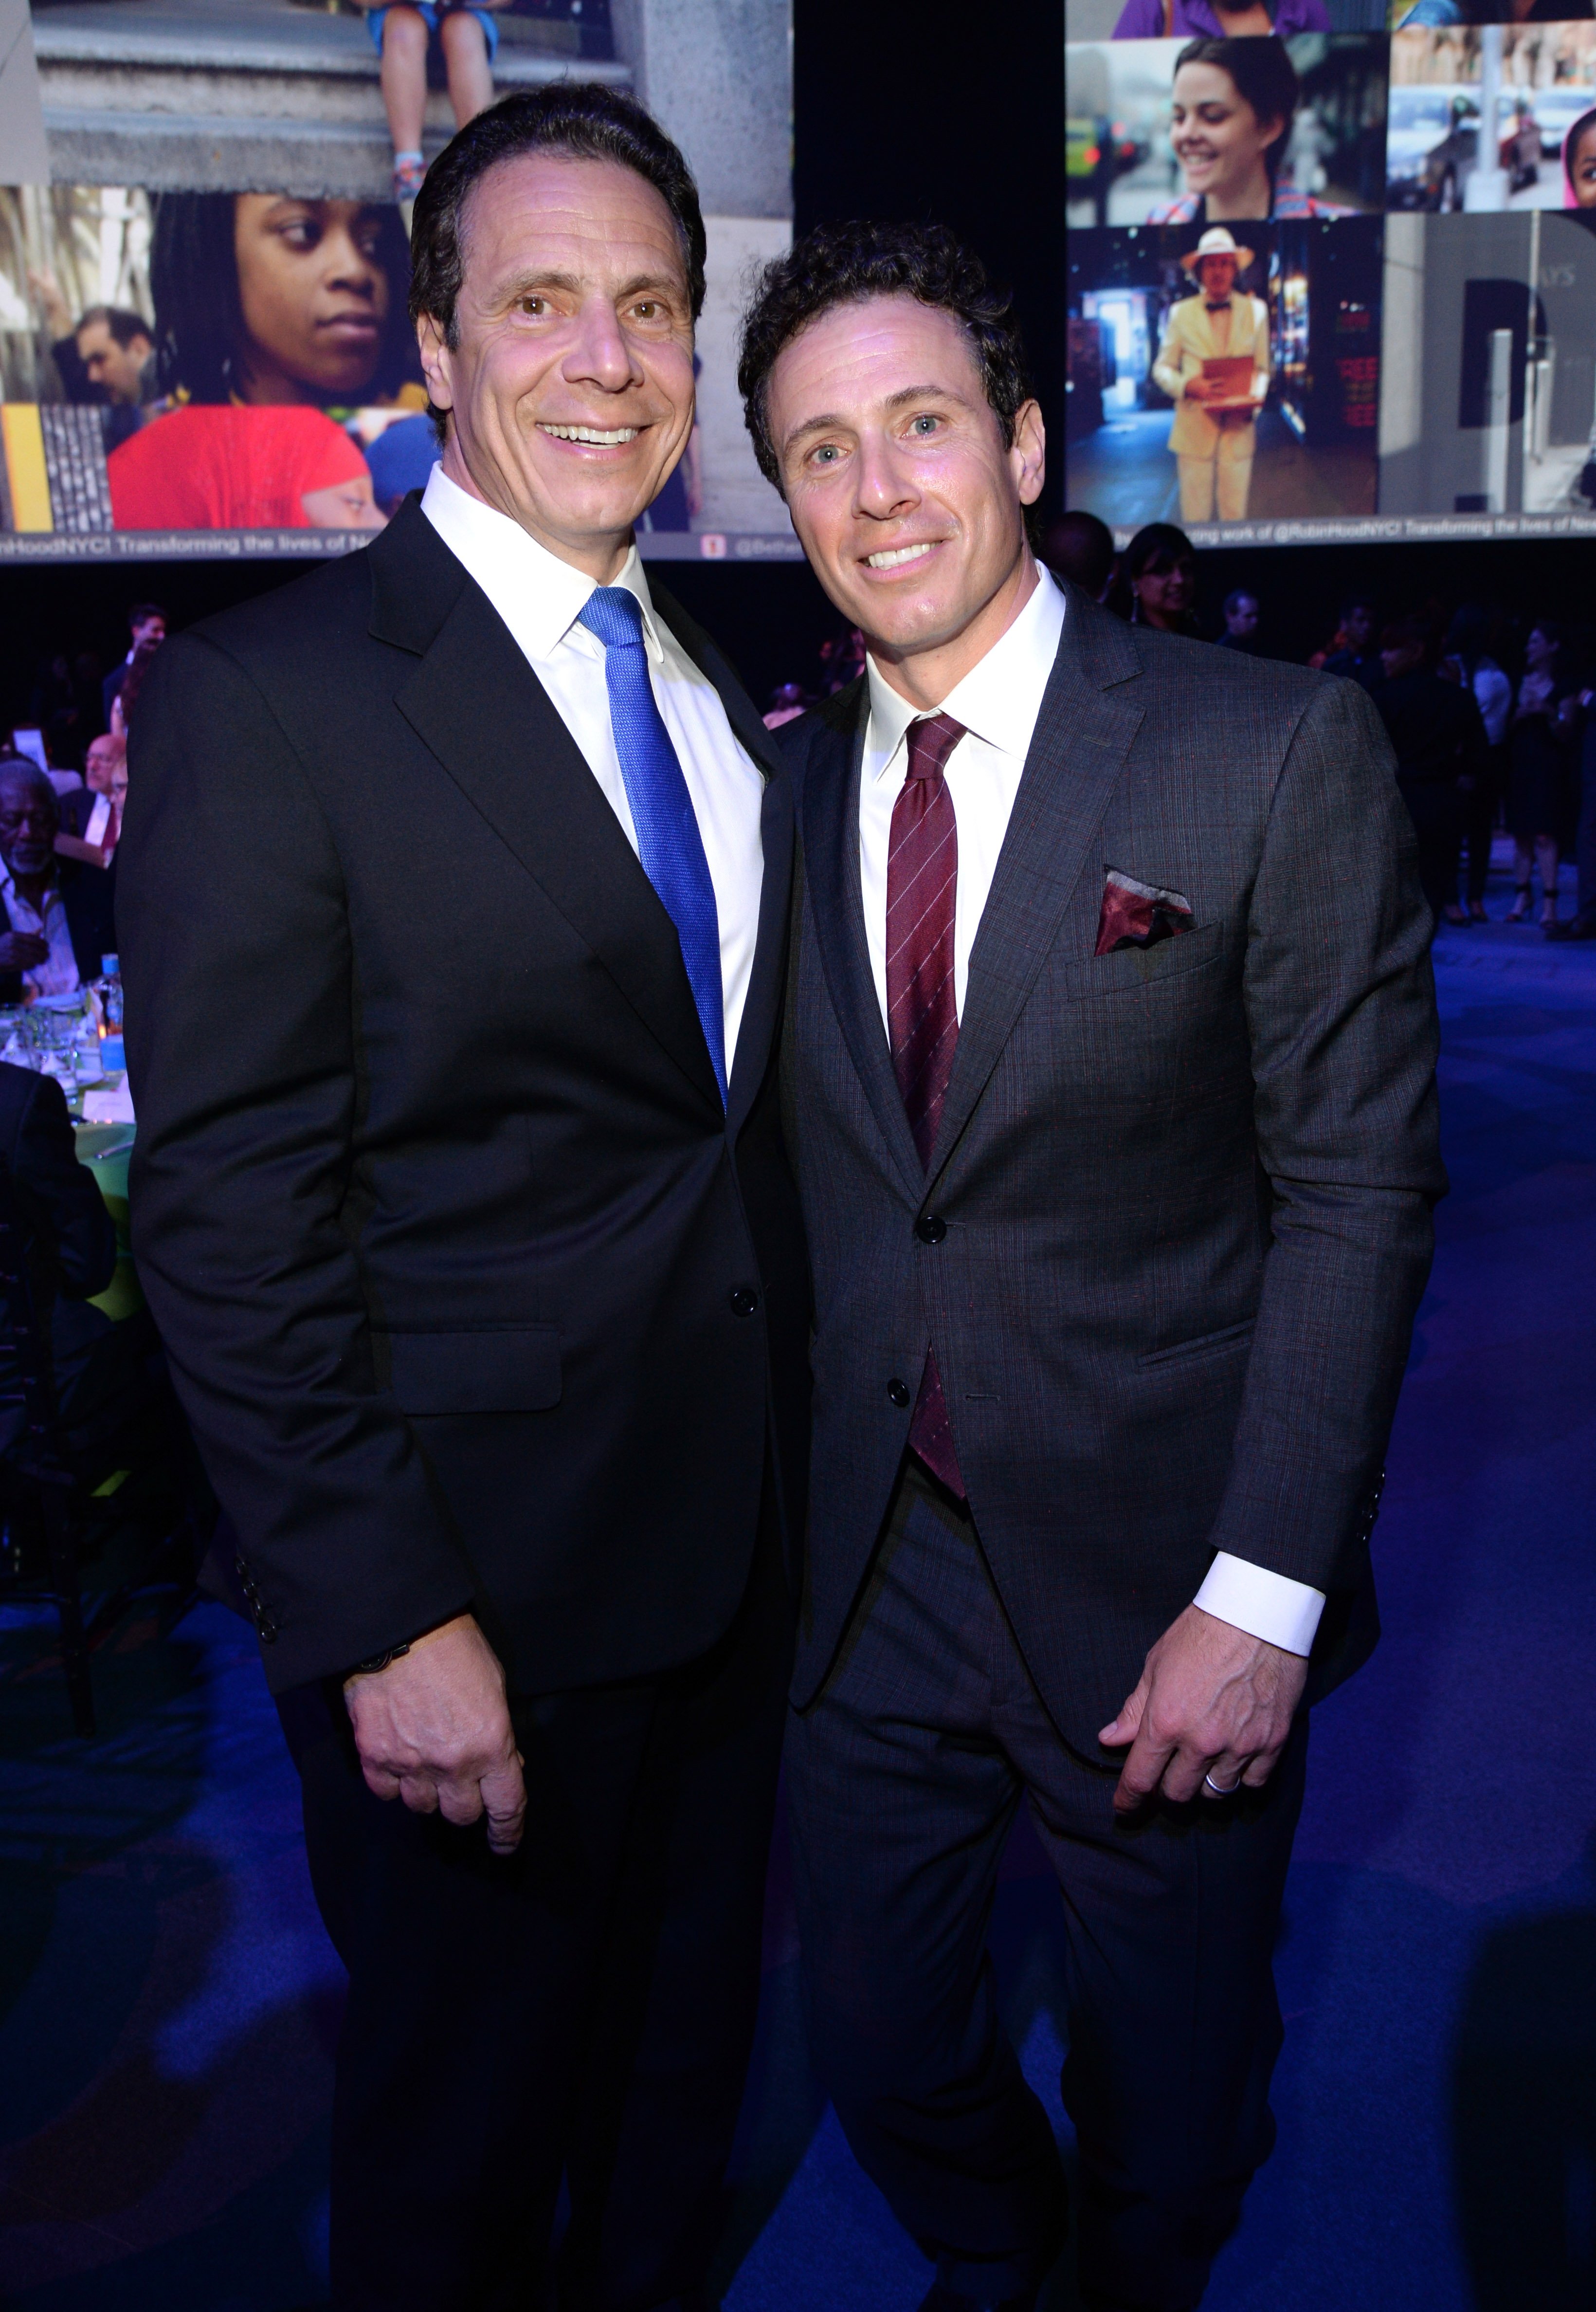 New York Governor Andrew Cuomo and Chris Cuomo attend The Robin Hood Foundation's 2015 Benefit on May 12, 2015, in New York City. | Source: Getty Images.